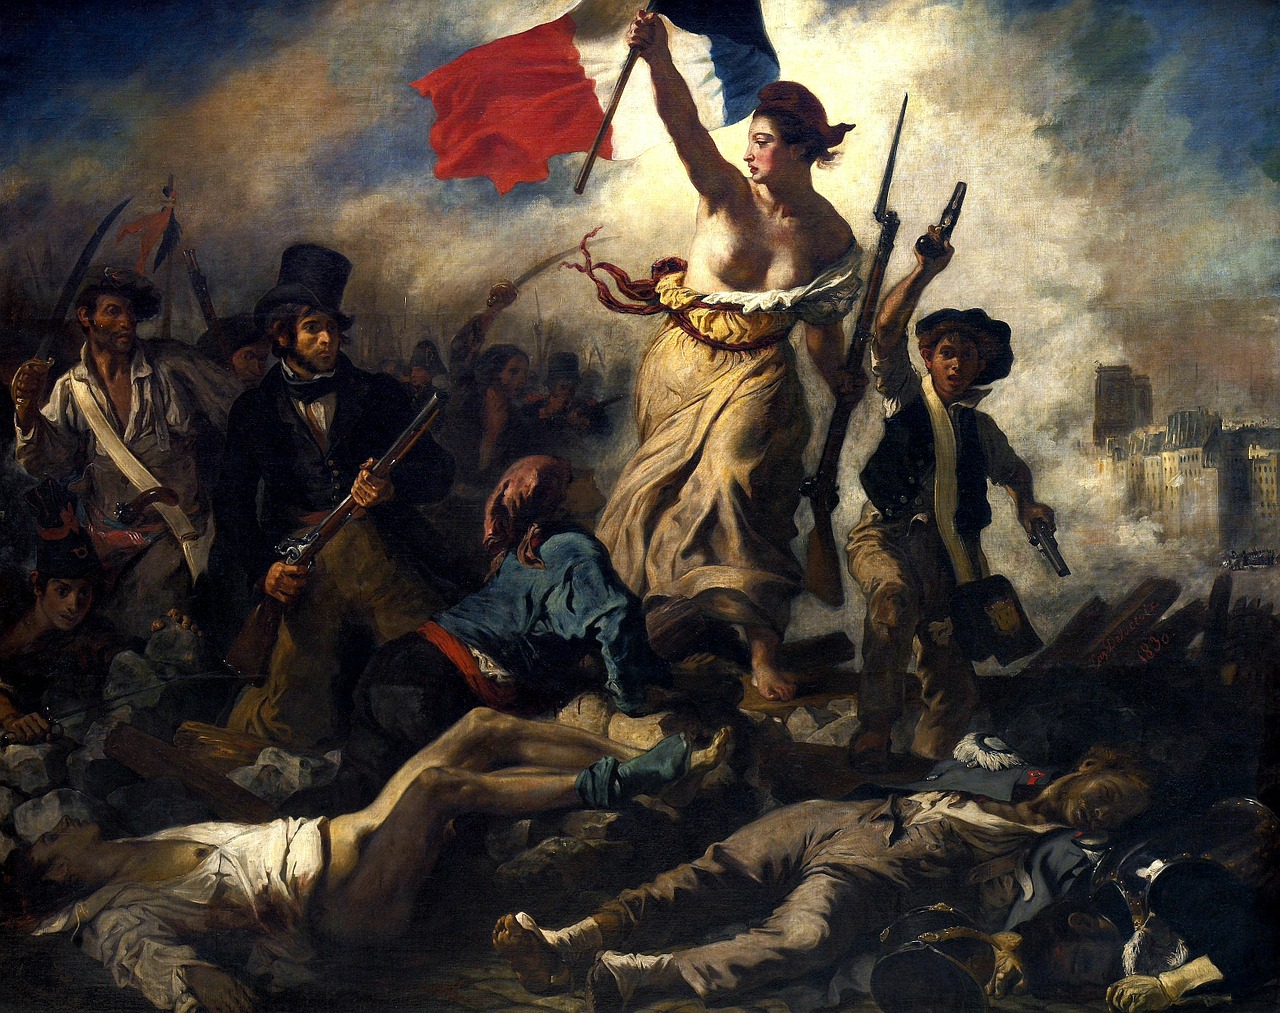 French revolution painting